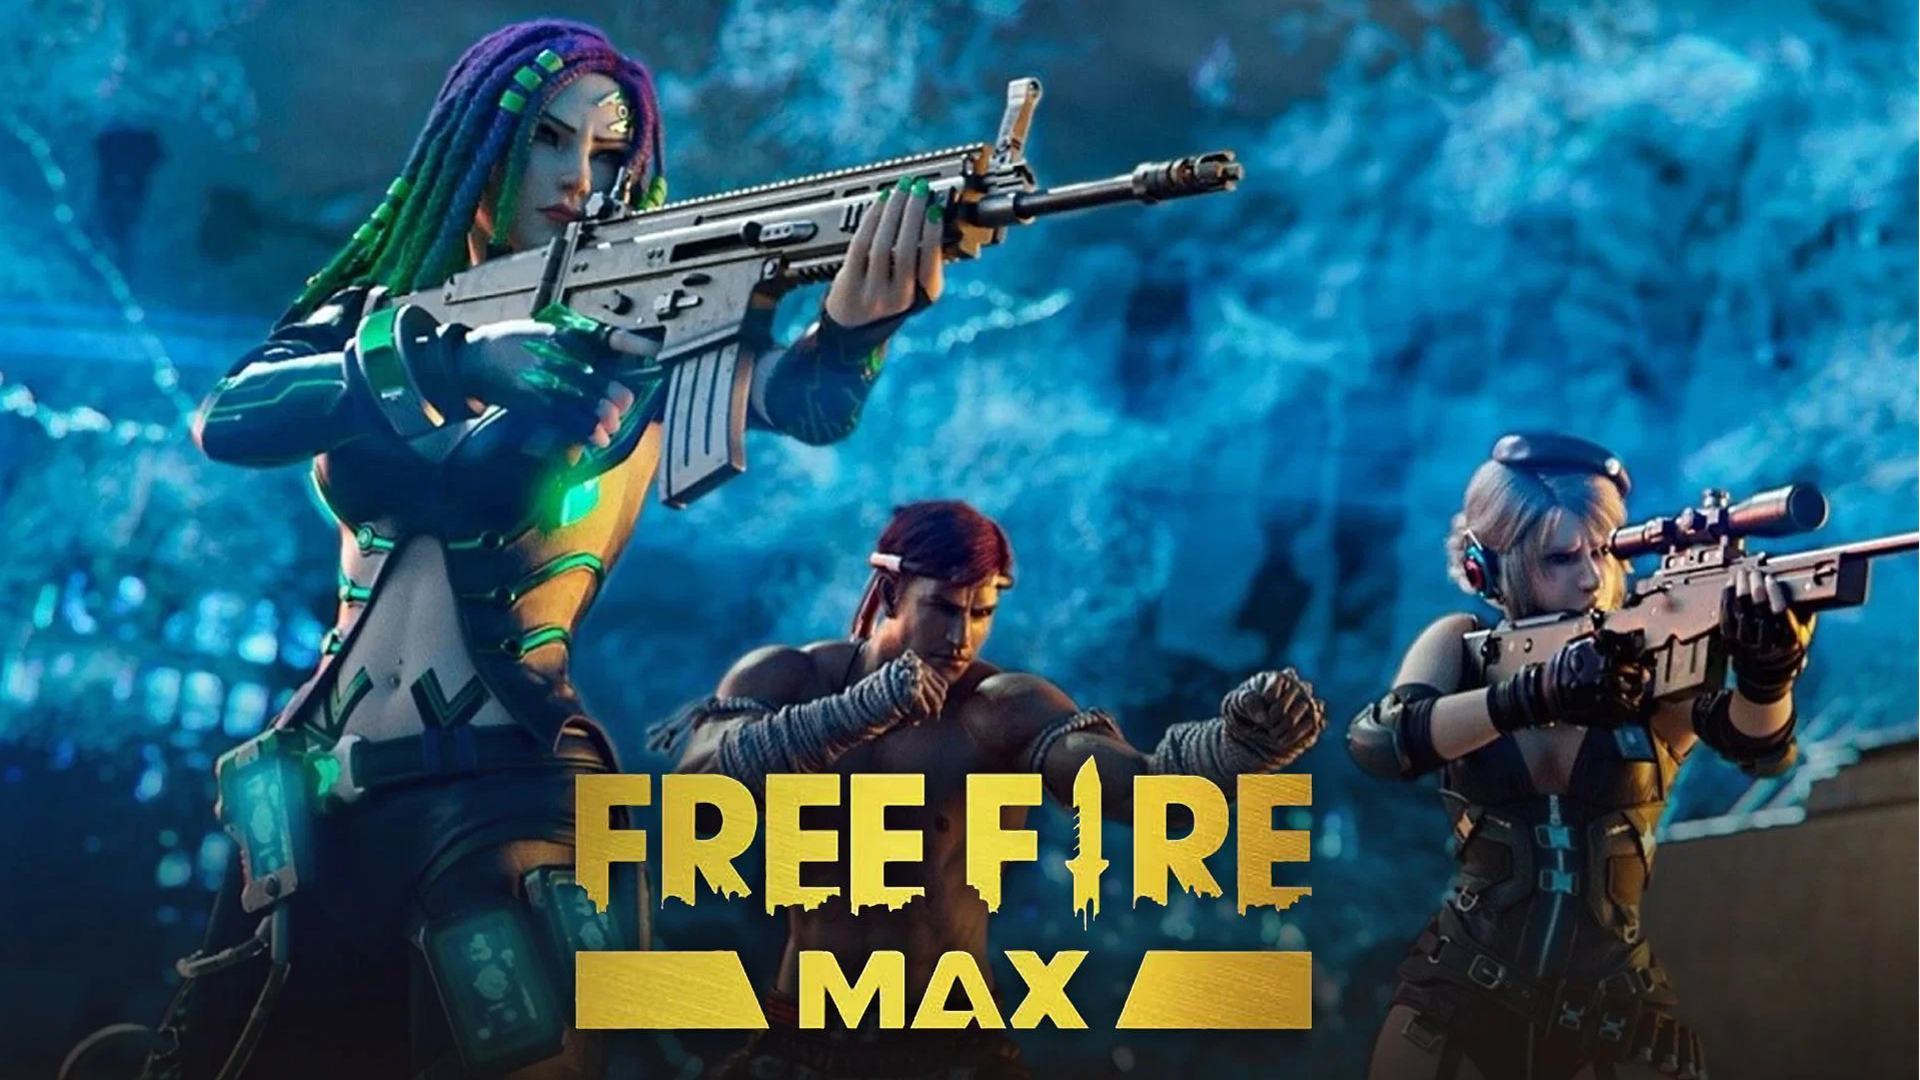 Garena Free Fire MAX codes for November 26: Redeem now